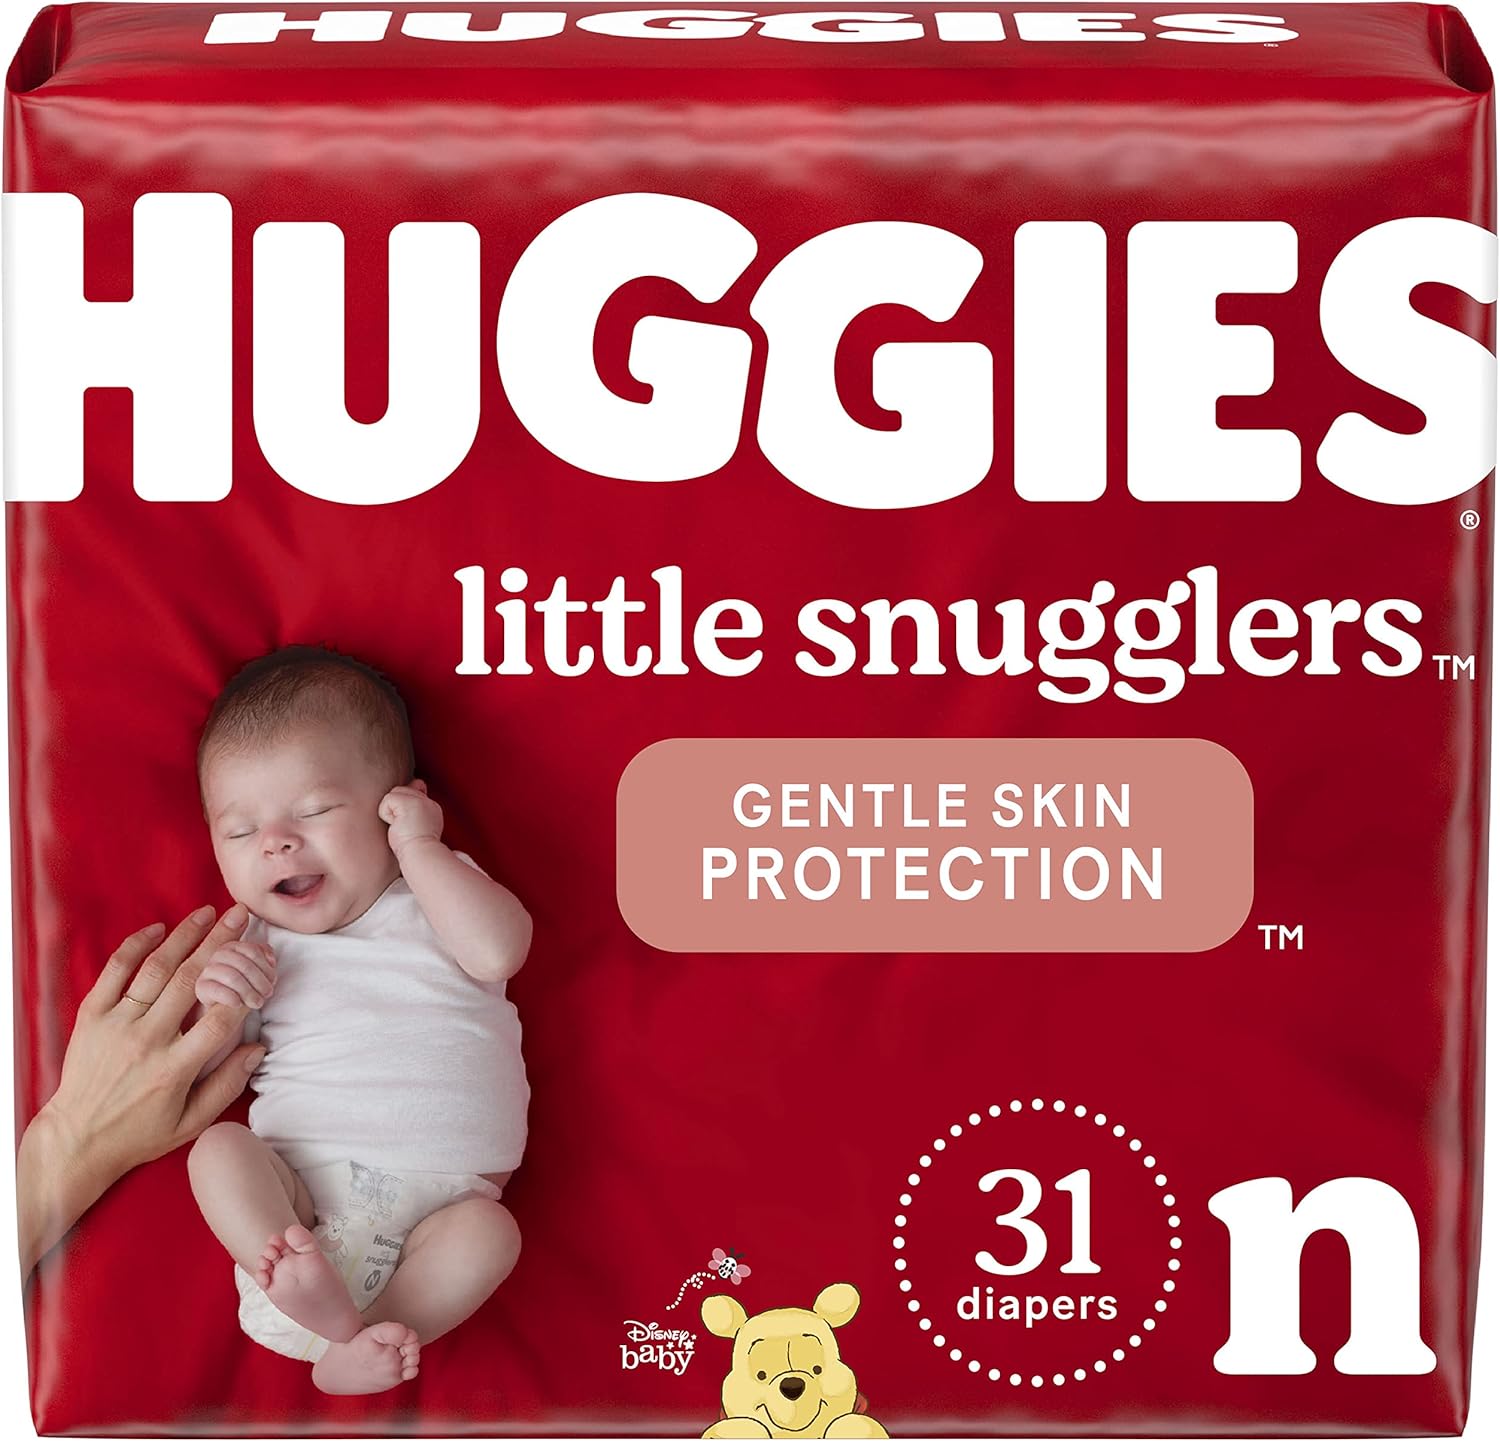 Baby Diapers Size Newborn (up to 10 lbs), 31ct, Huggies Little Snugglers